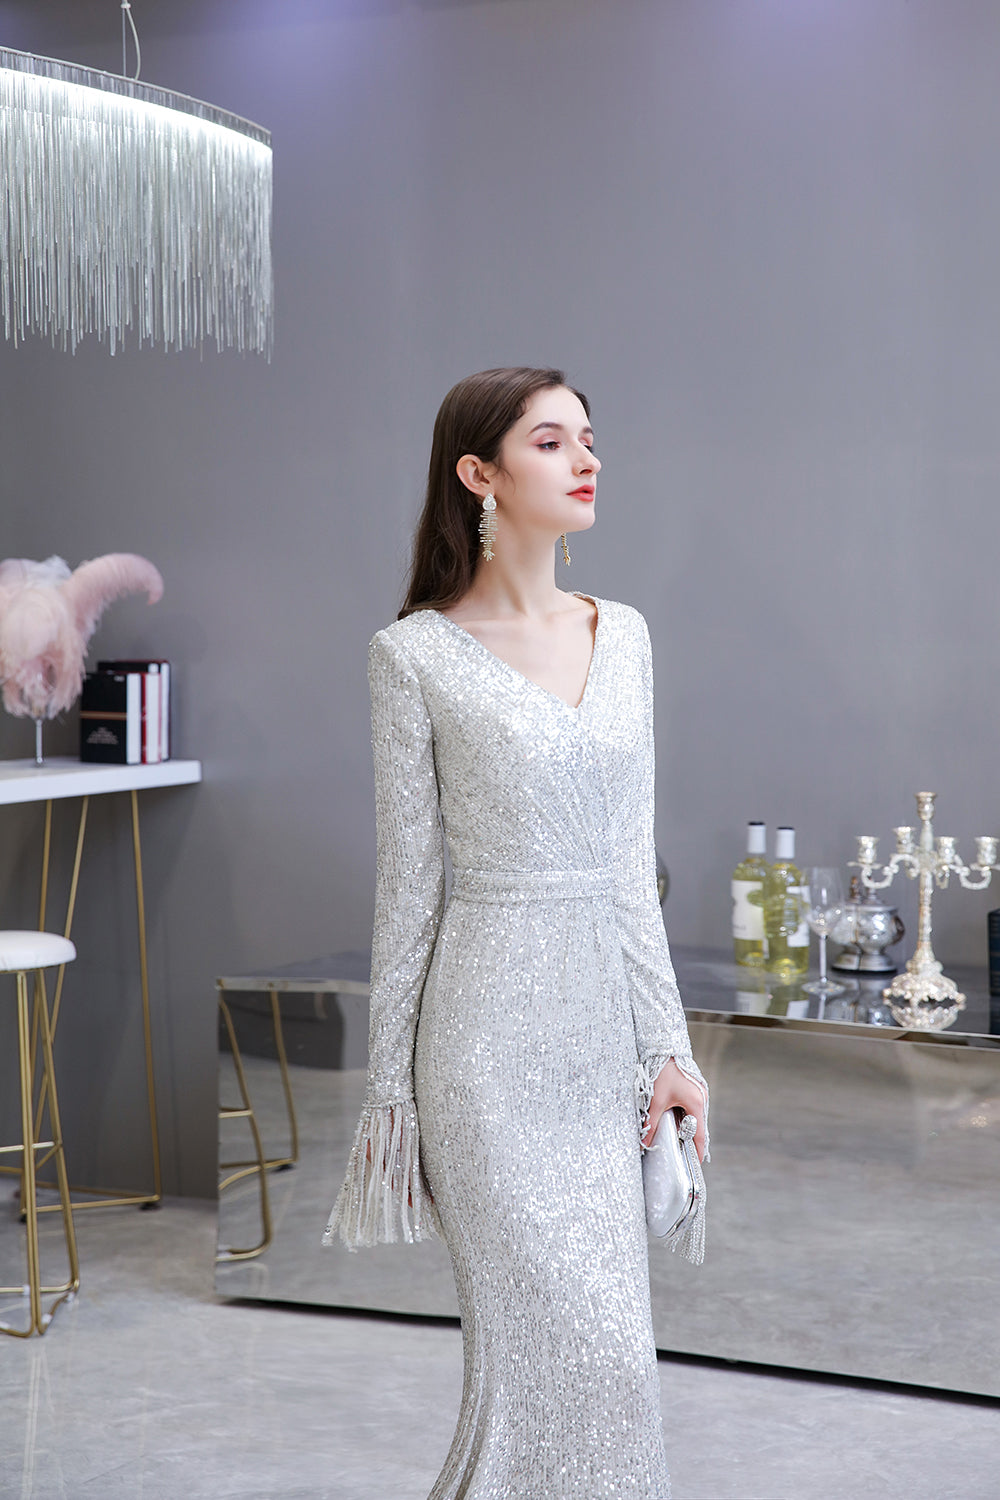 Gorgeous Sequins Long Sleeve V-Neck Mermaid Evening Gowns-BIZTUNNEL